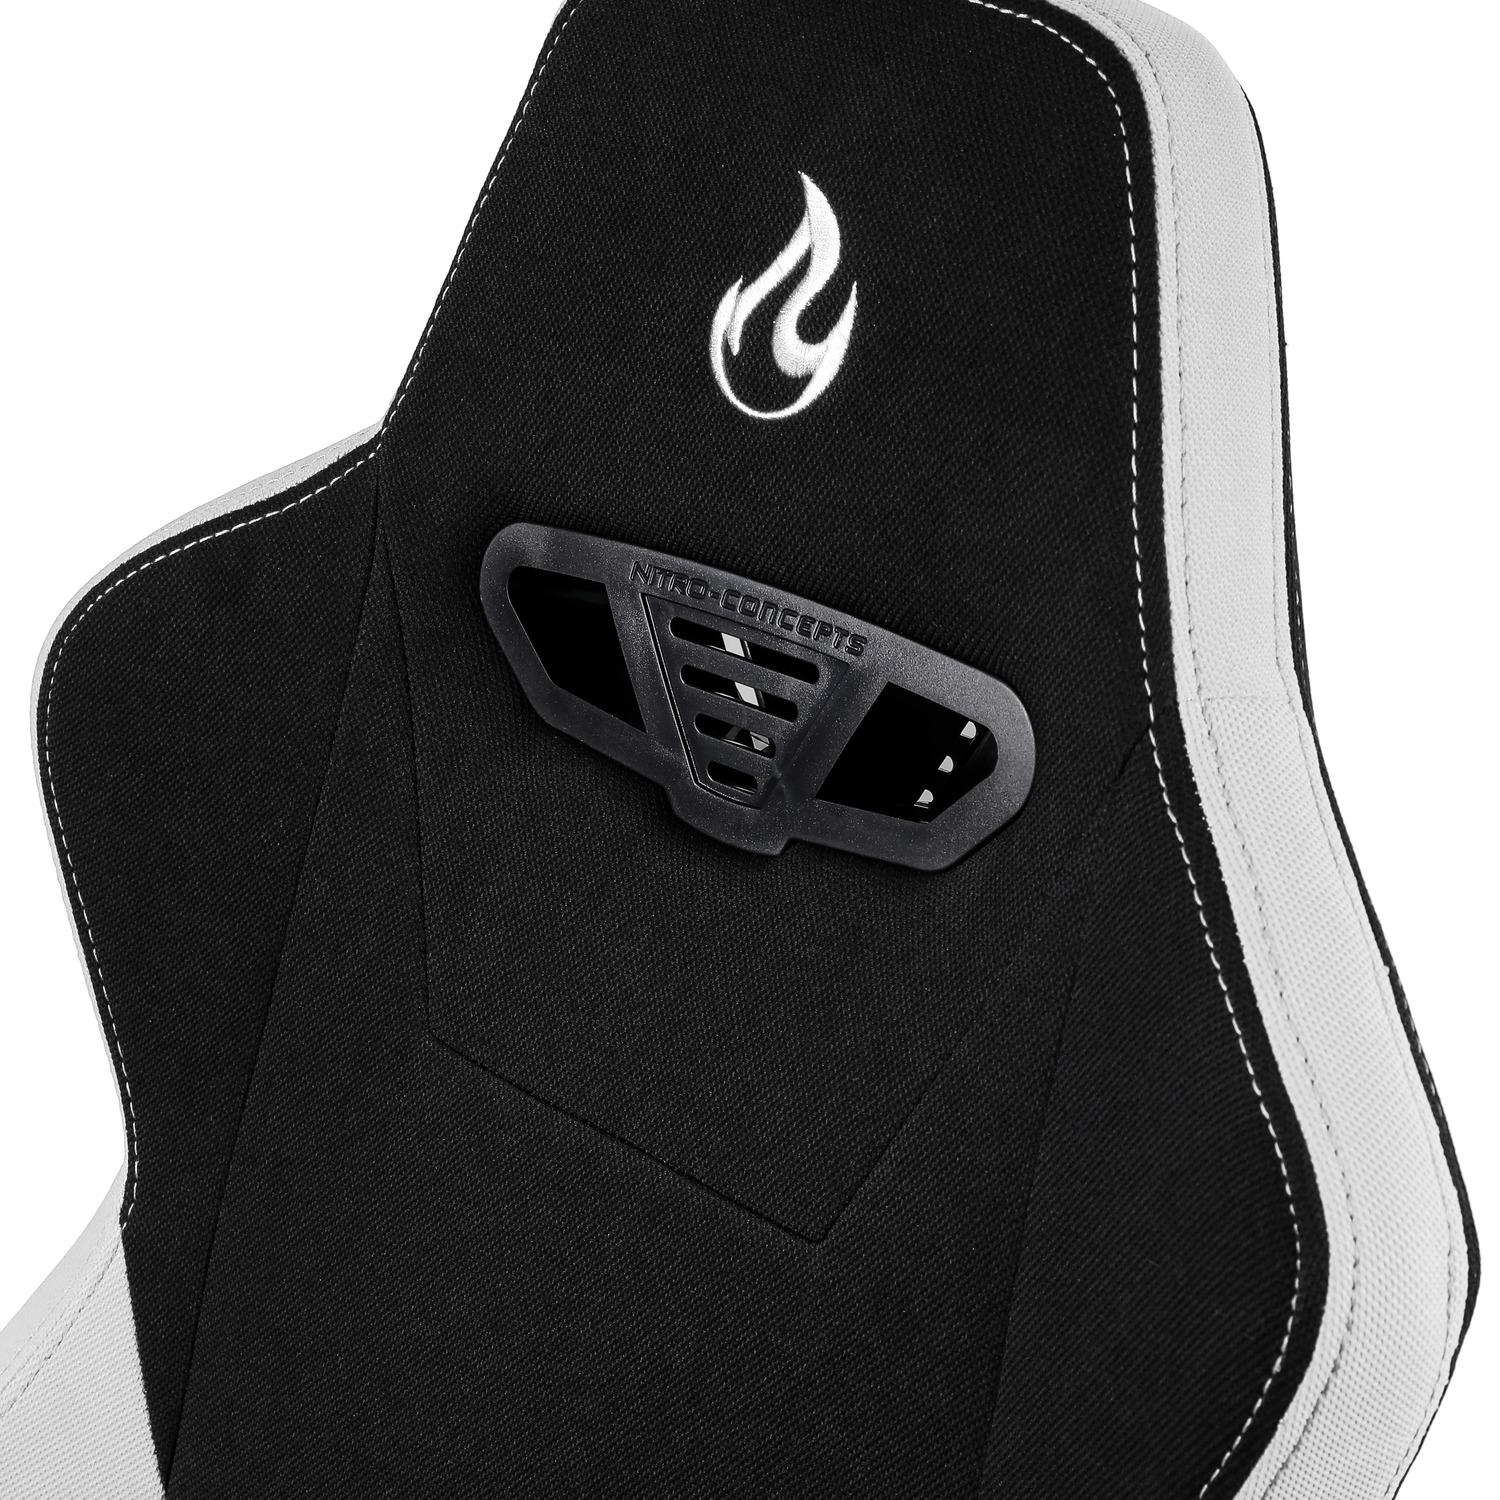 nitro-concepts - S300 Gaming Chair Radiant White